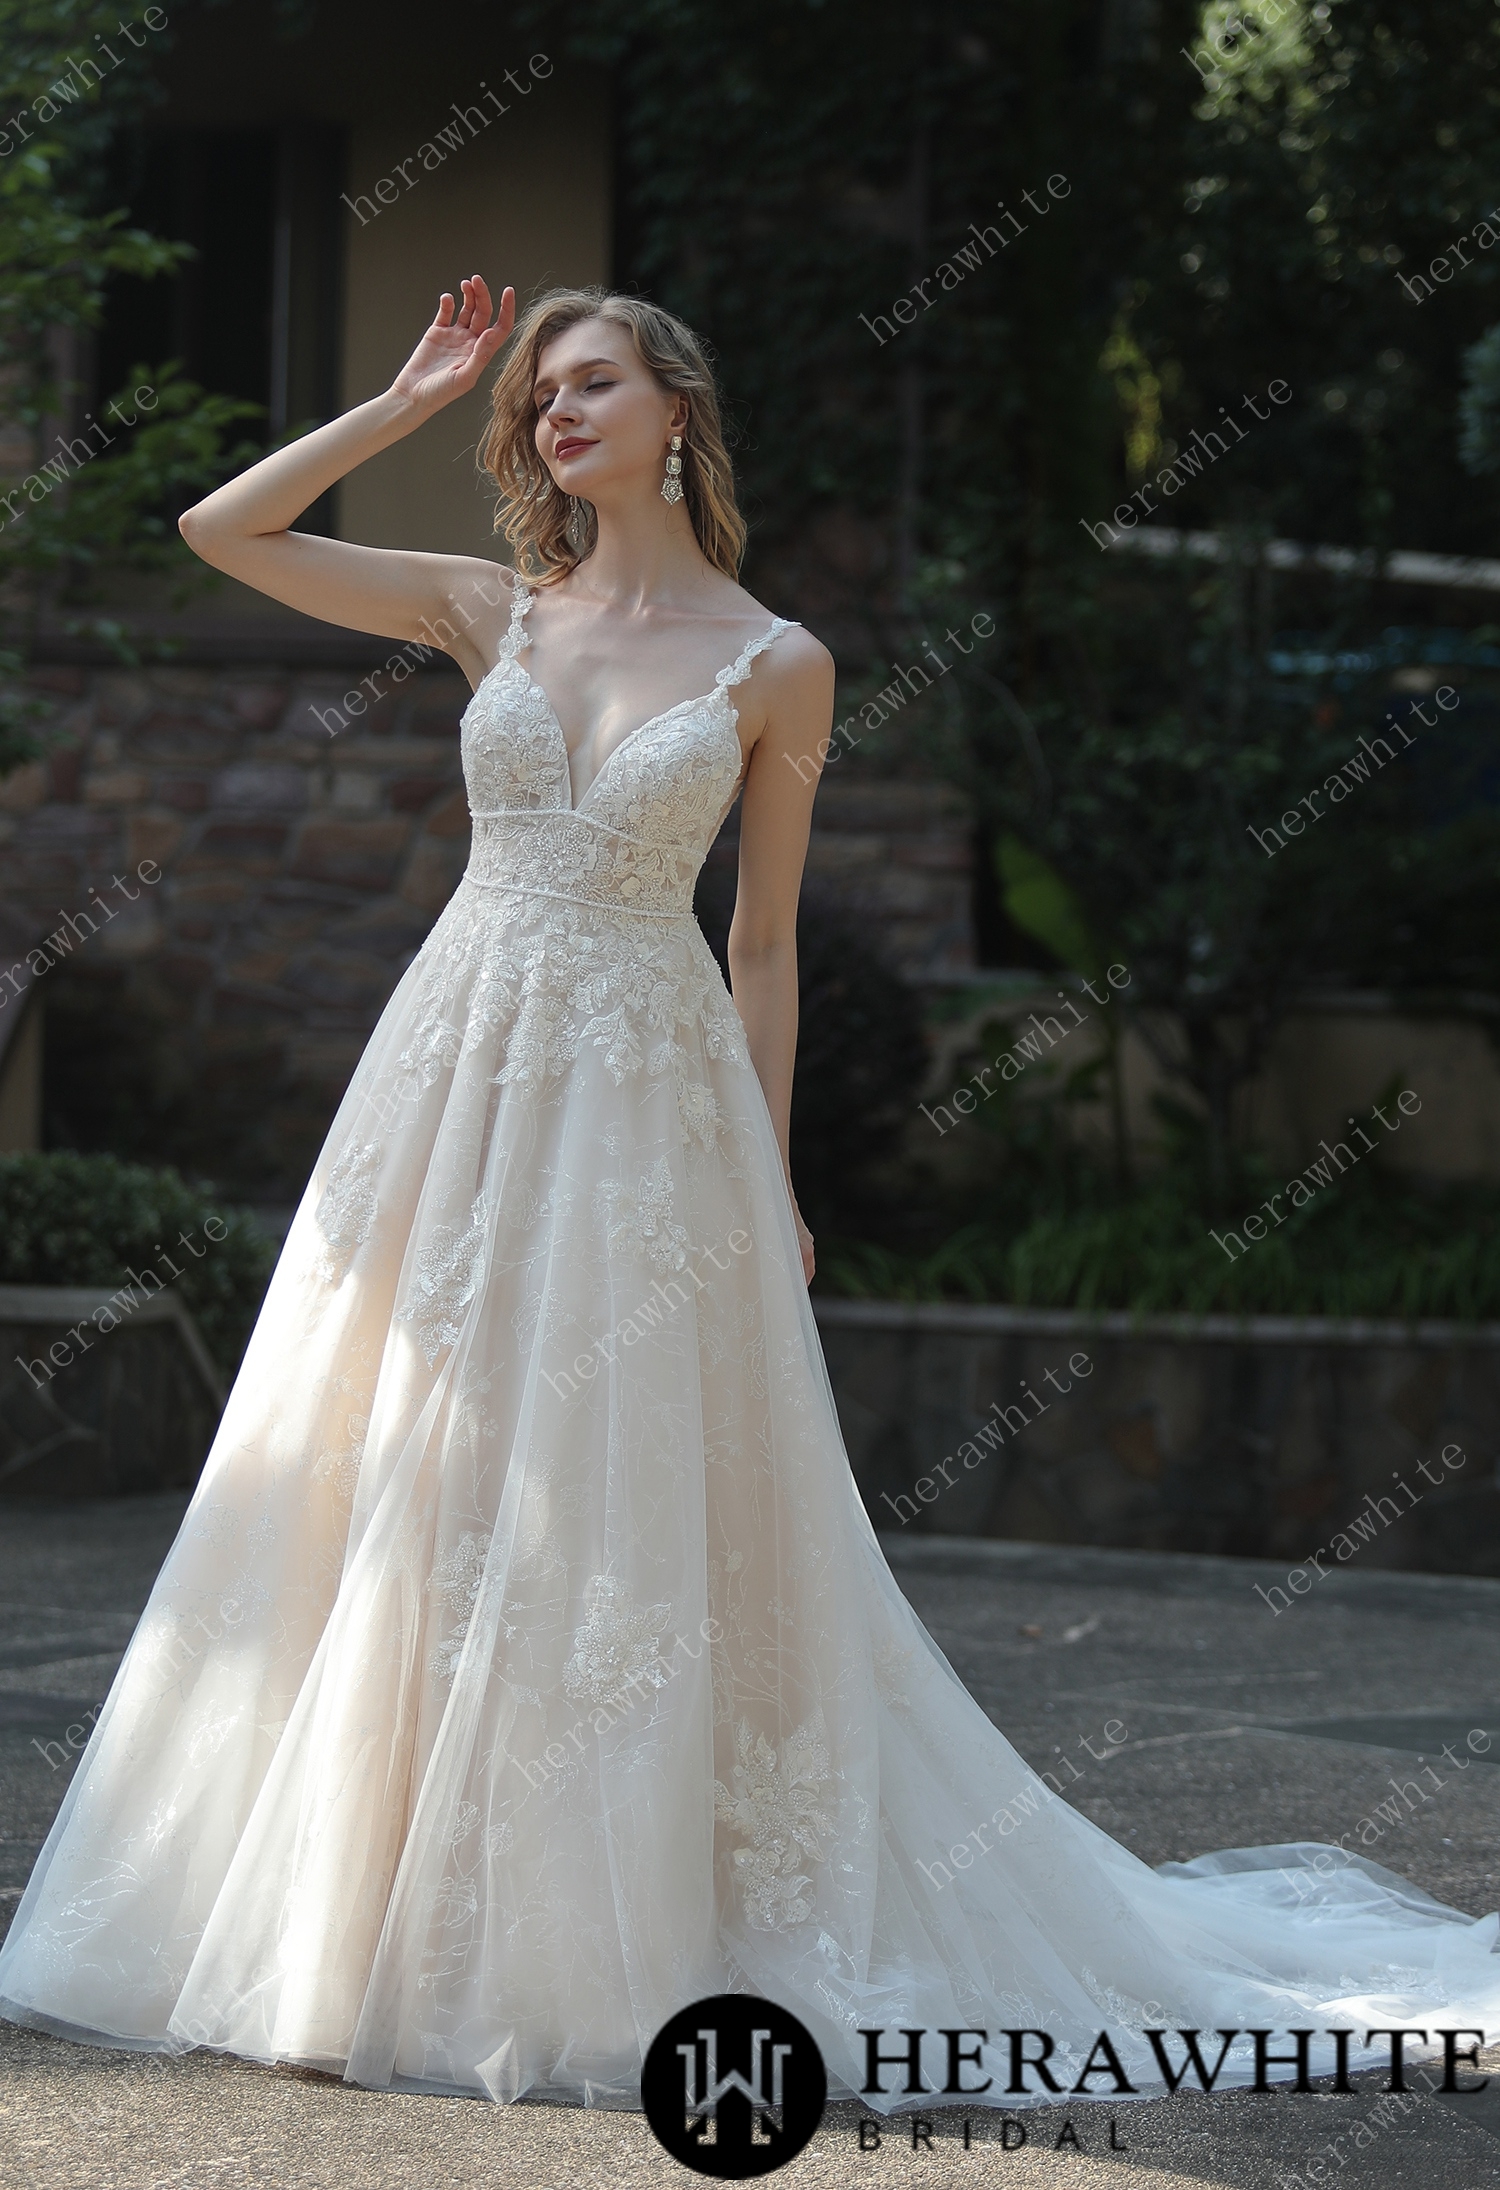 Plunging Sweetheart Beaded Wedding Dress With Double Band